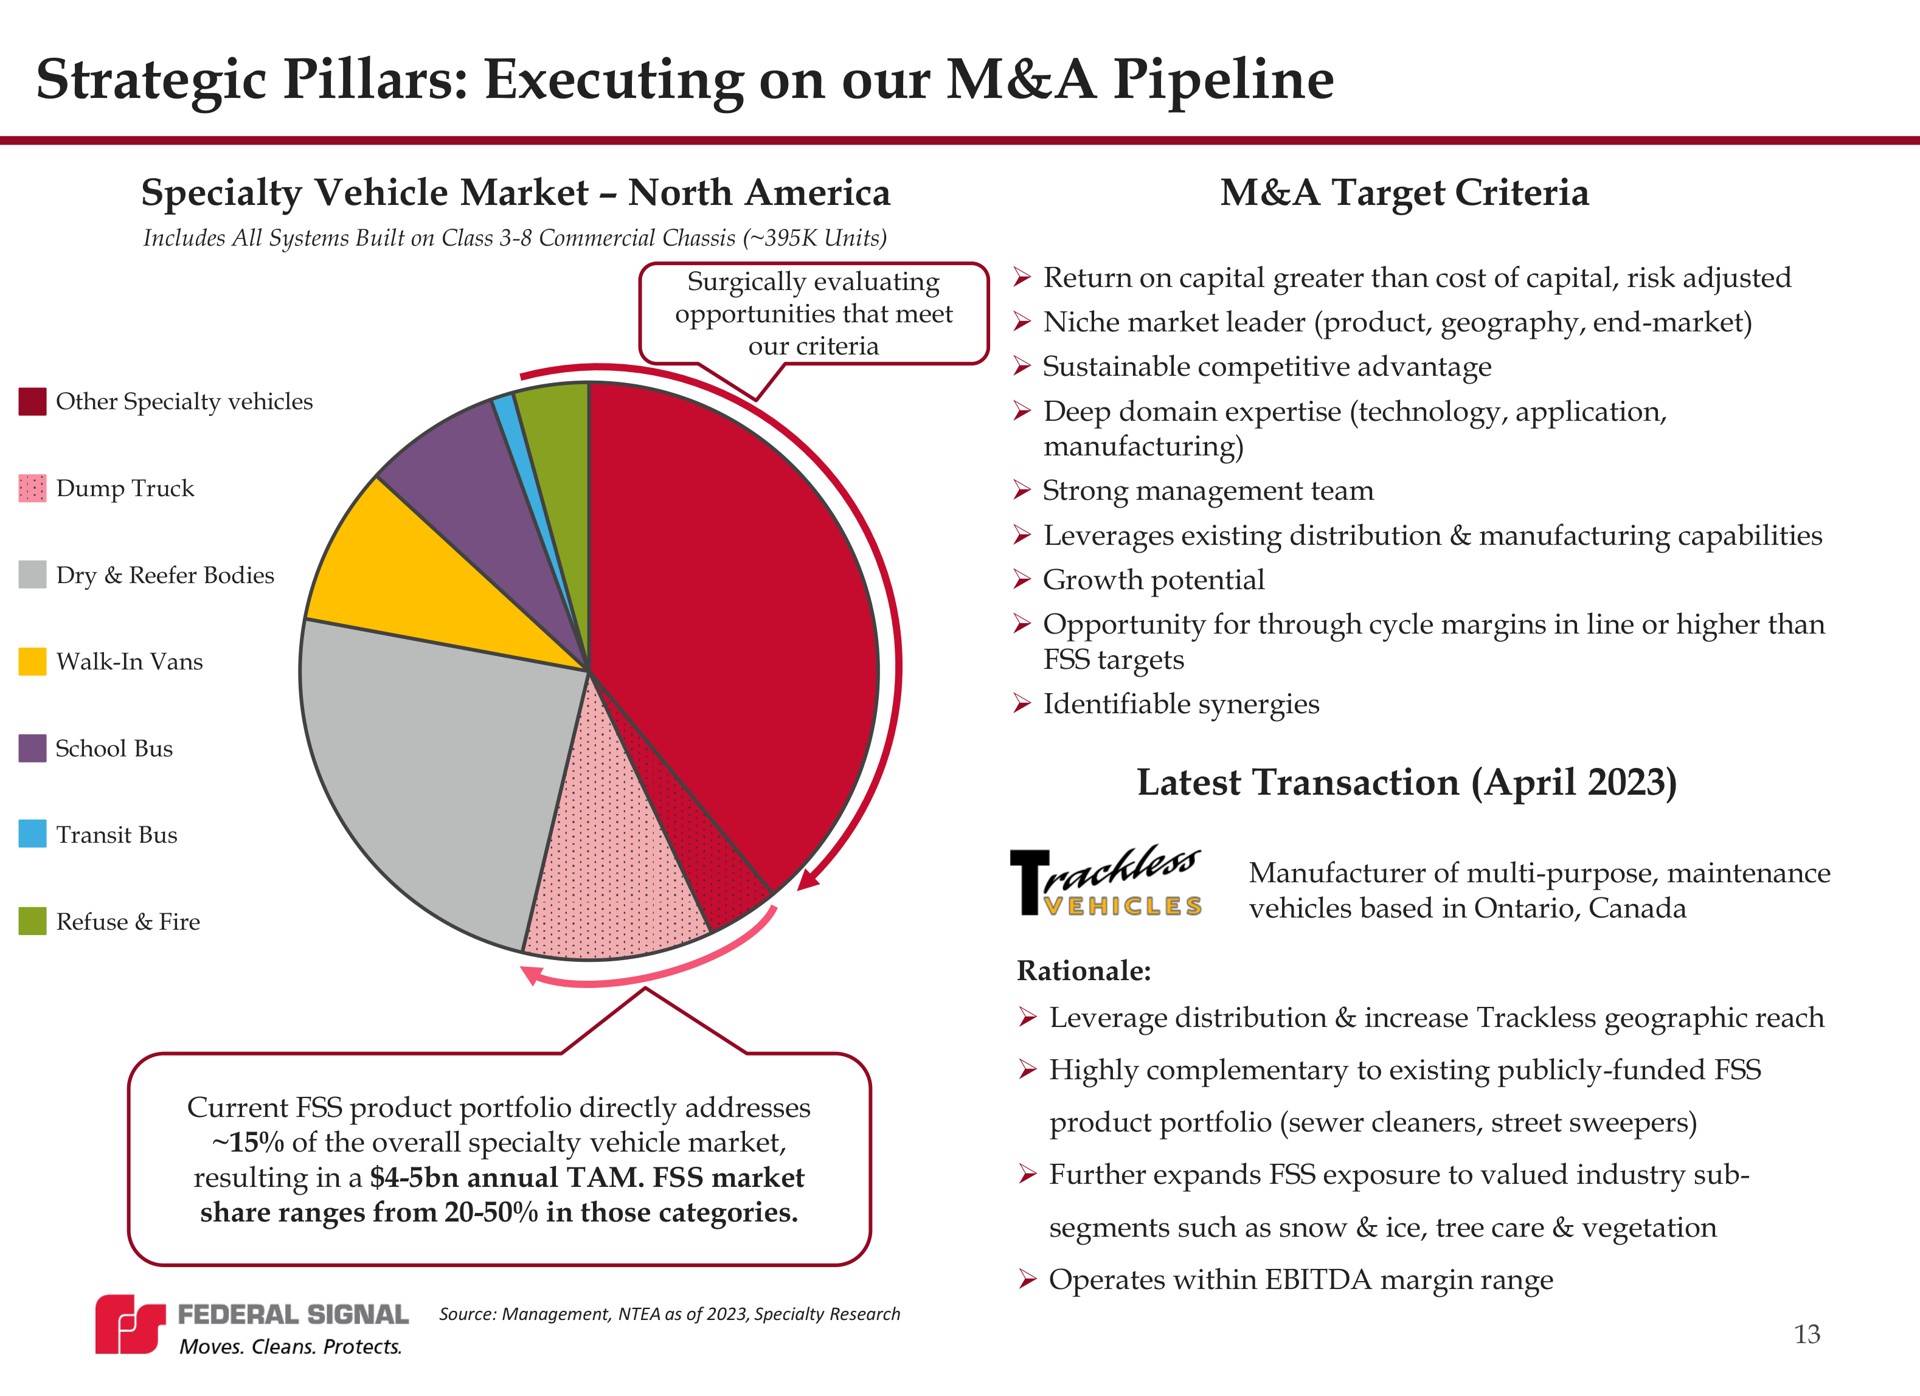 strategic pillars executing on our a pipeline specialty vehicle market north a target criteria latest transaction | Federal Signal